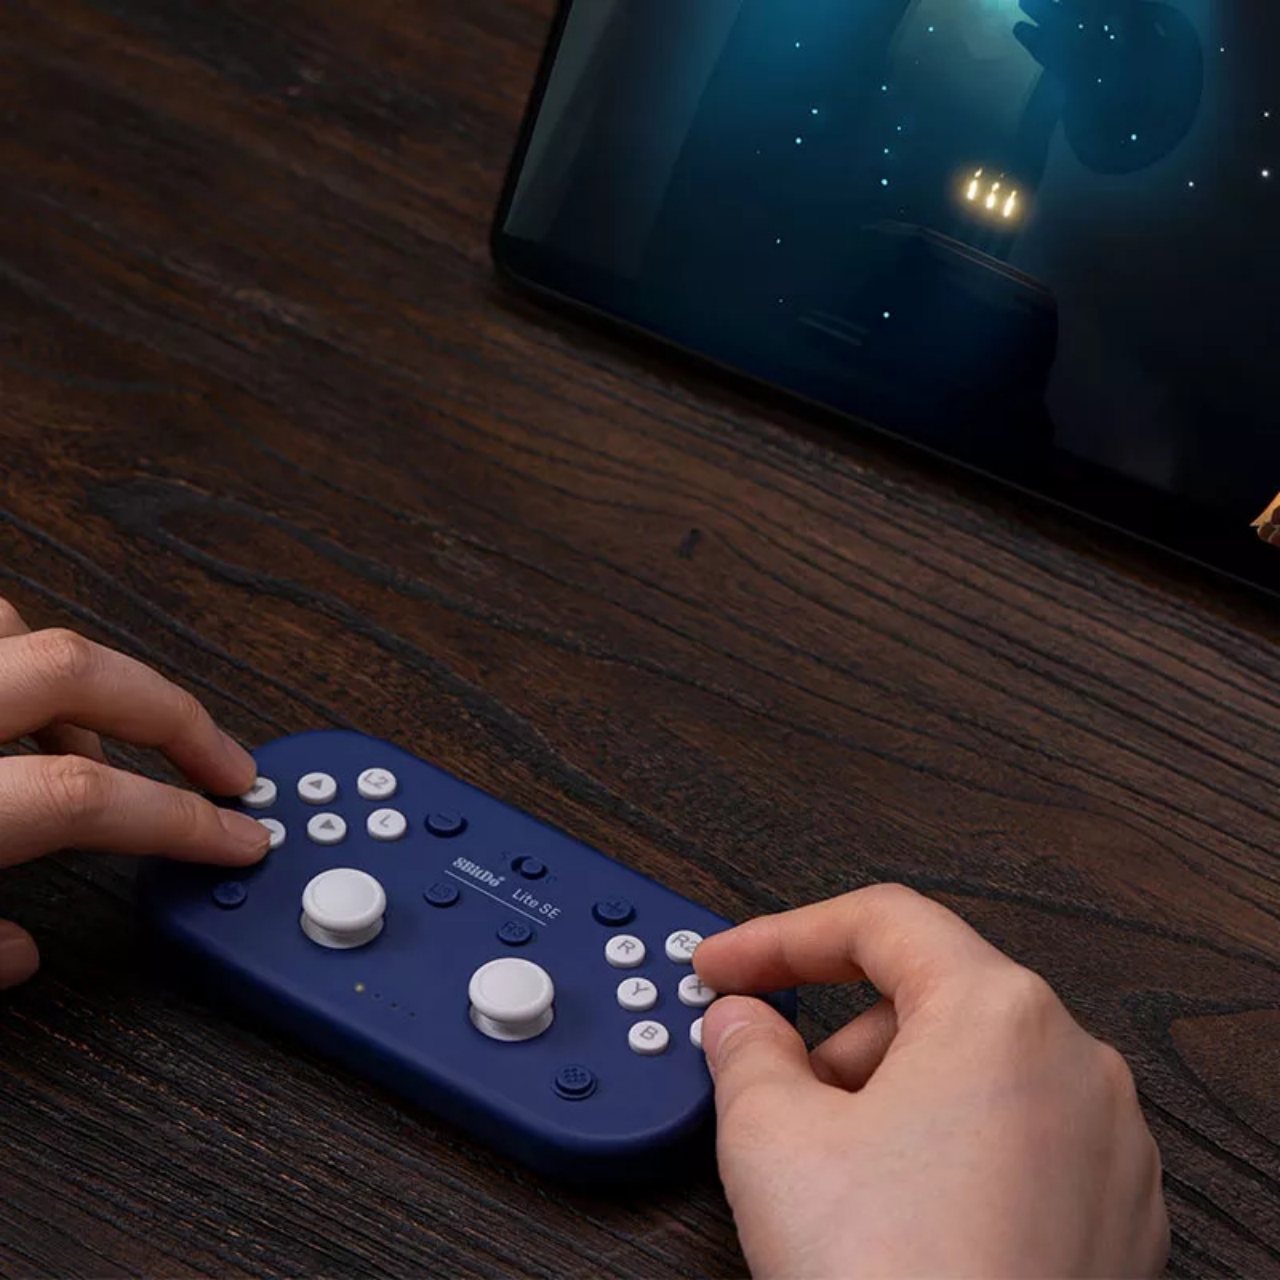 8BitDo's New Controller is For Disabled Gamers